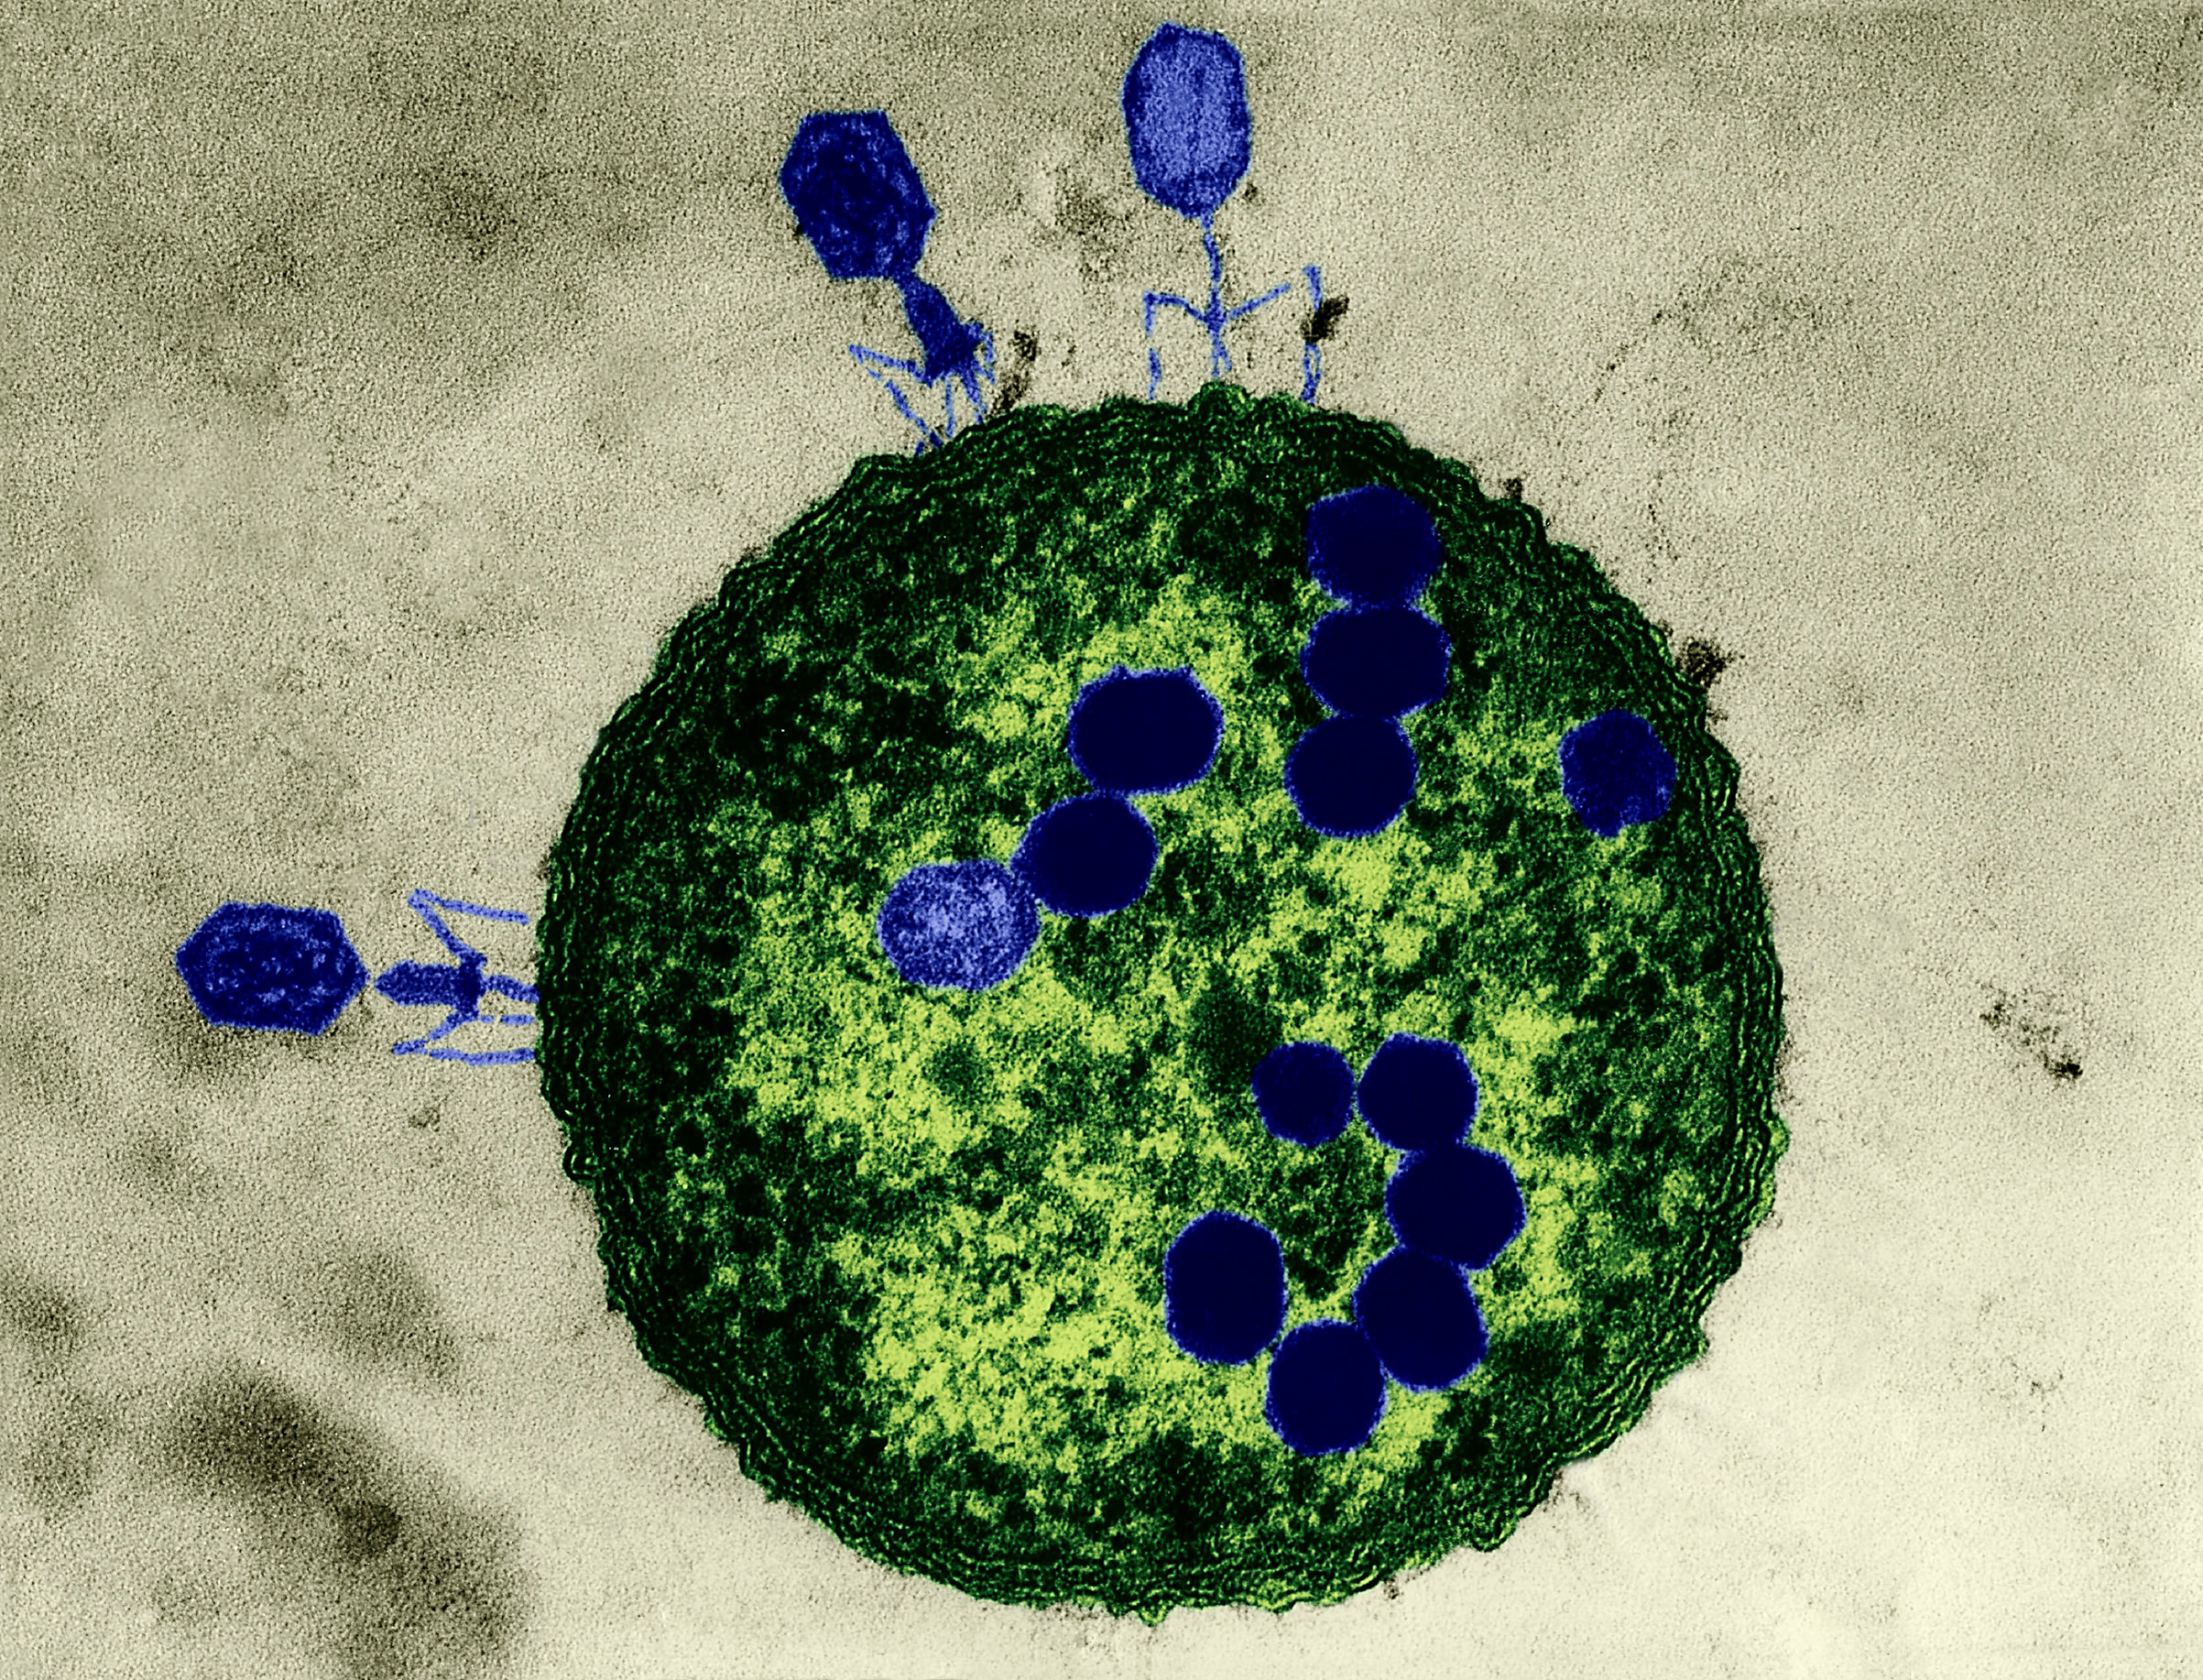 Bacteriophages, which are viruses, attack by invading and replicating inside drug-resistant bacteria, causing them to explode (D Simon Lee—;Getty Images/Science Source)